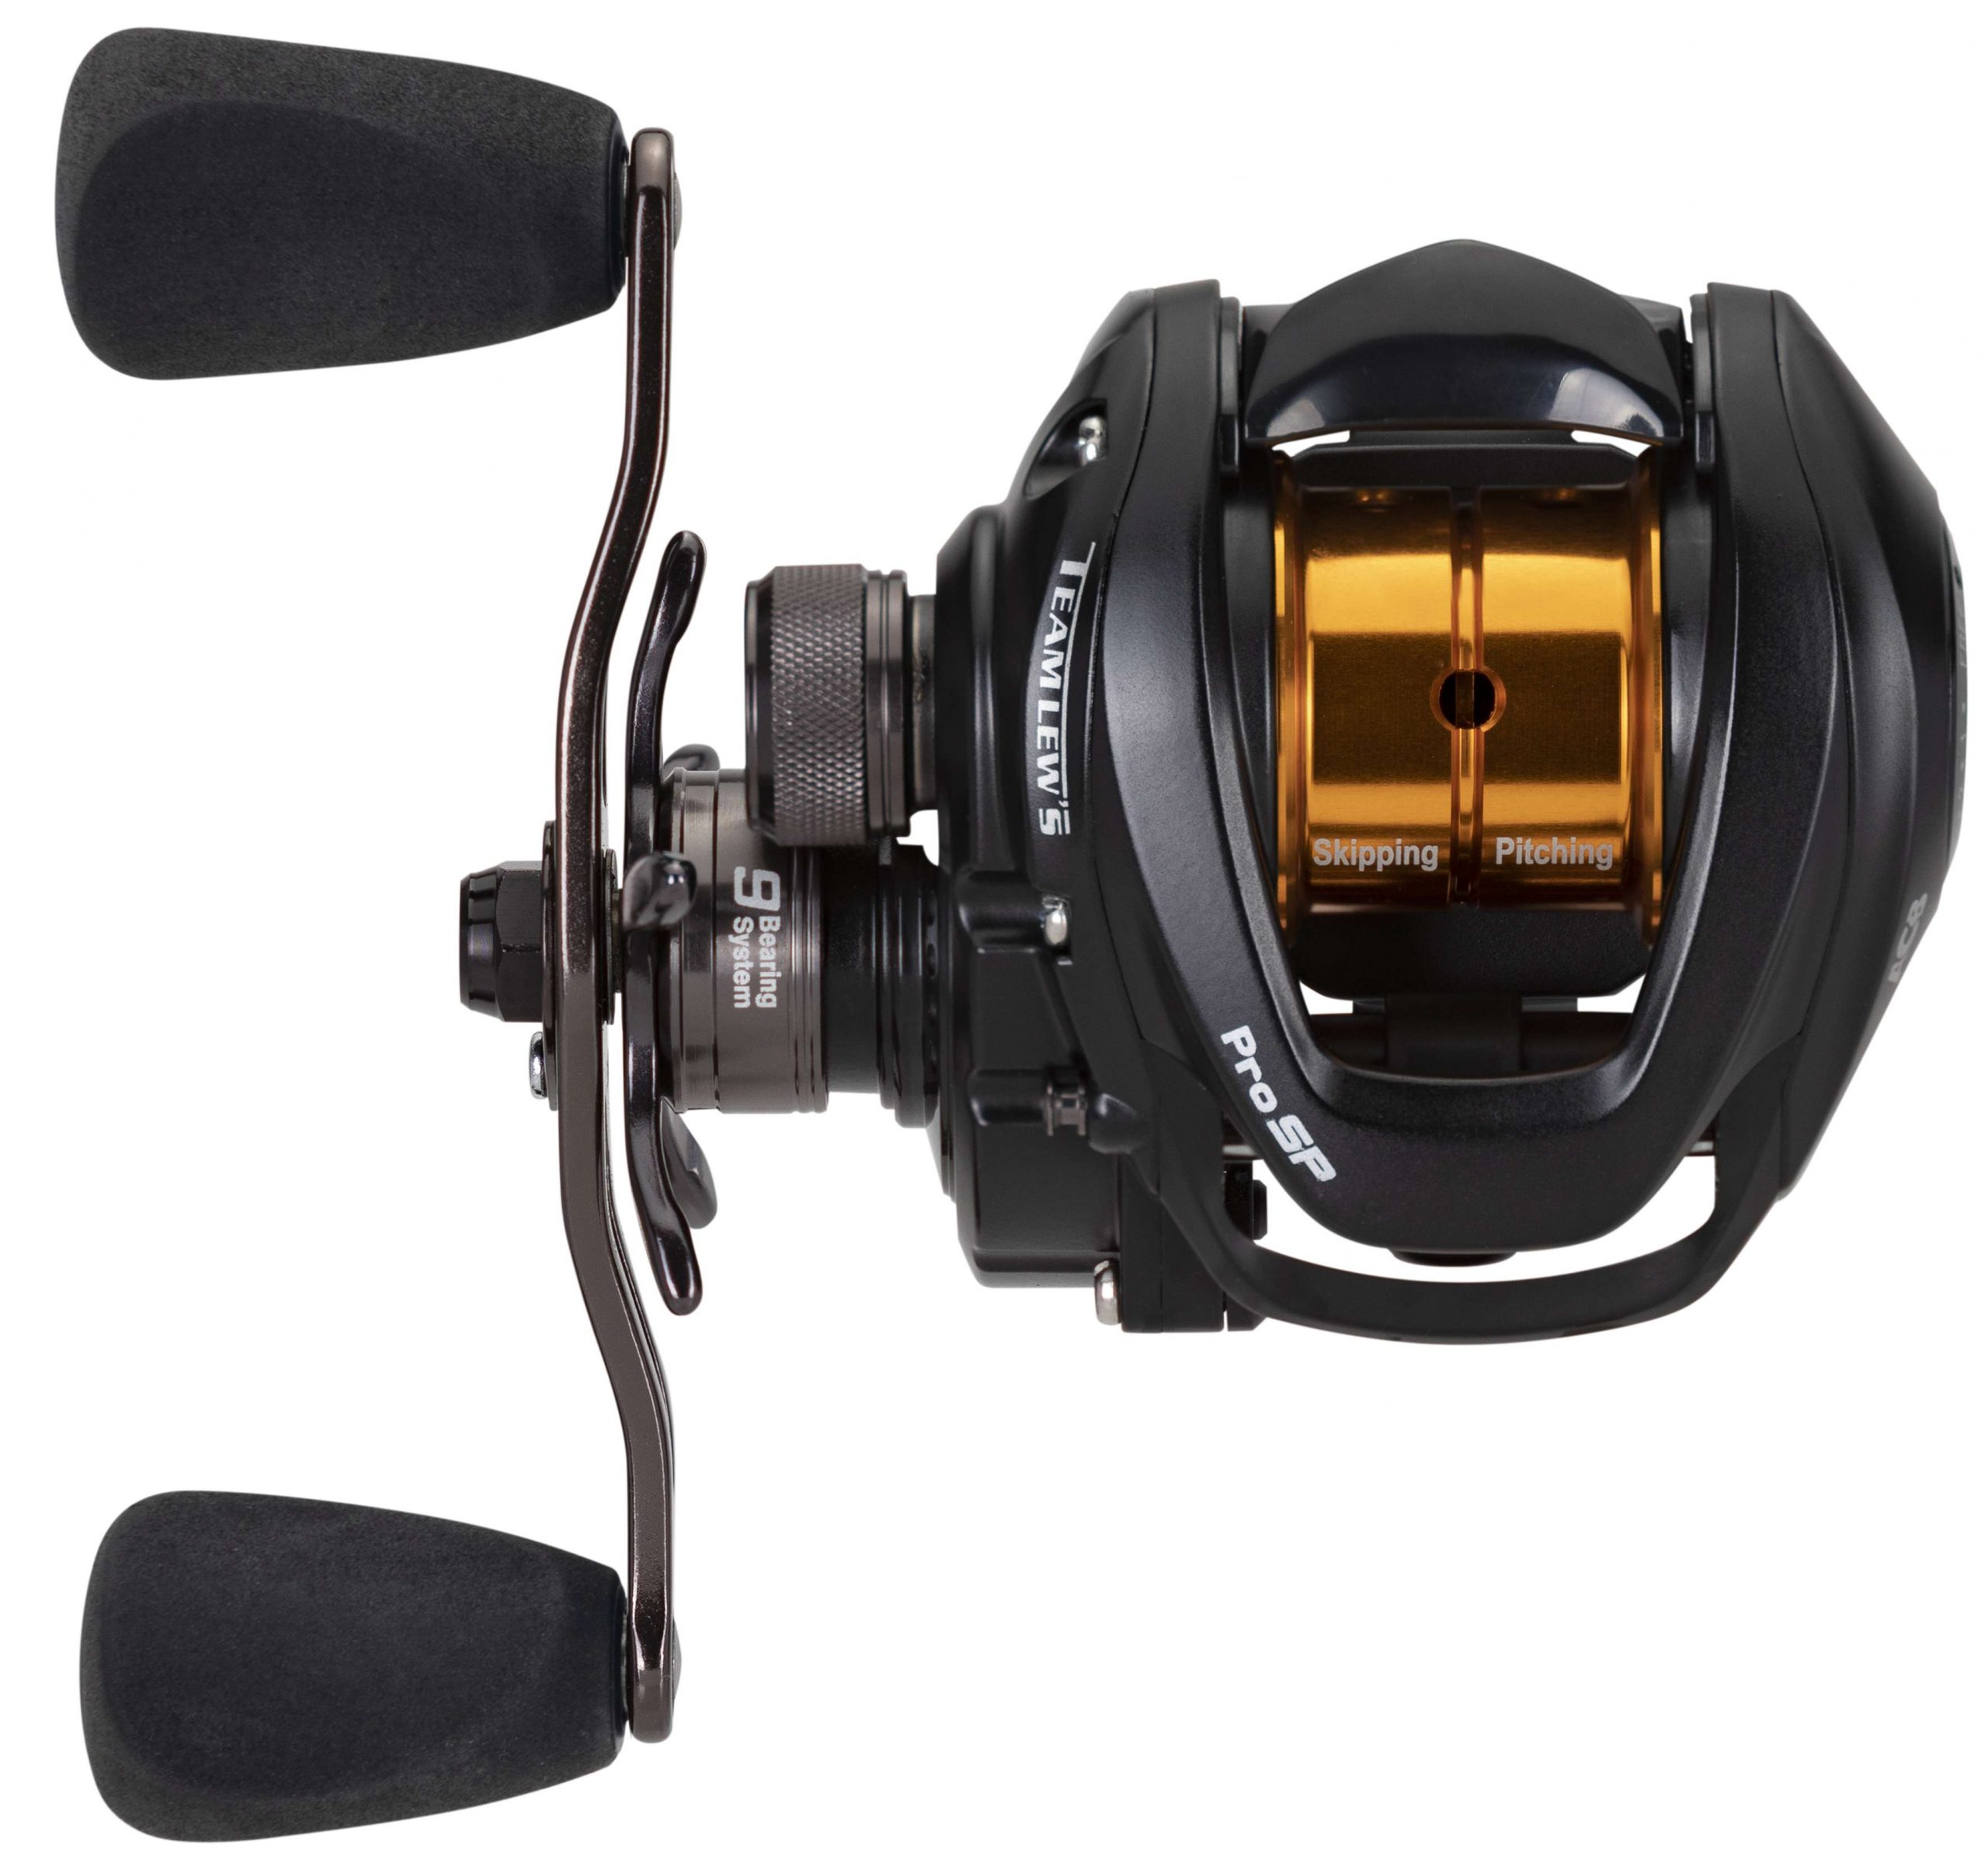 Lew's Team Pro SP Speed Spool Casting Reel Review, 54% OFF